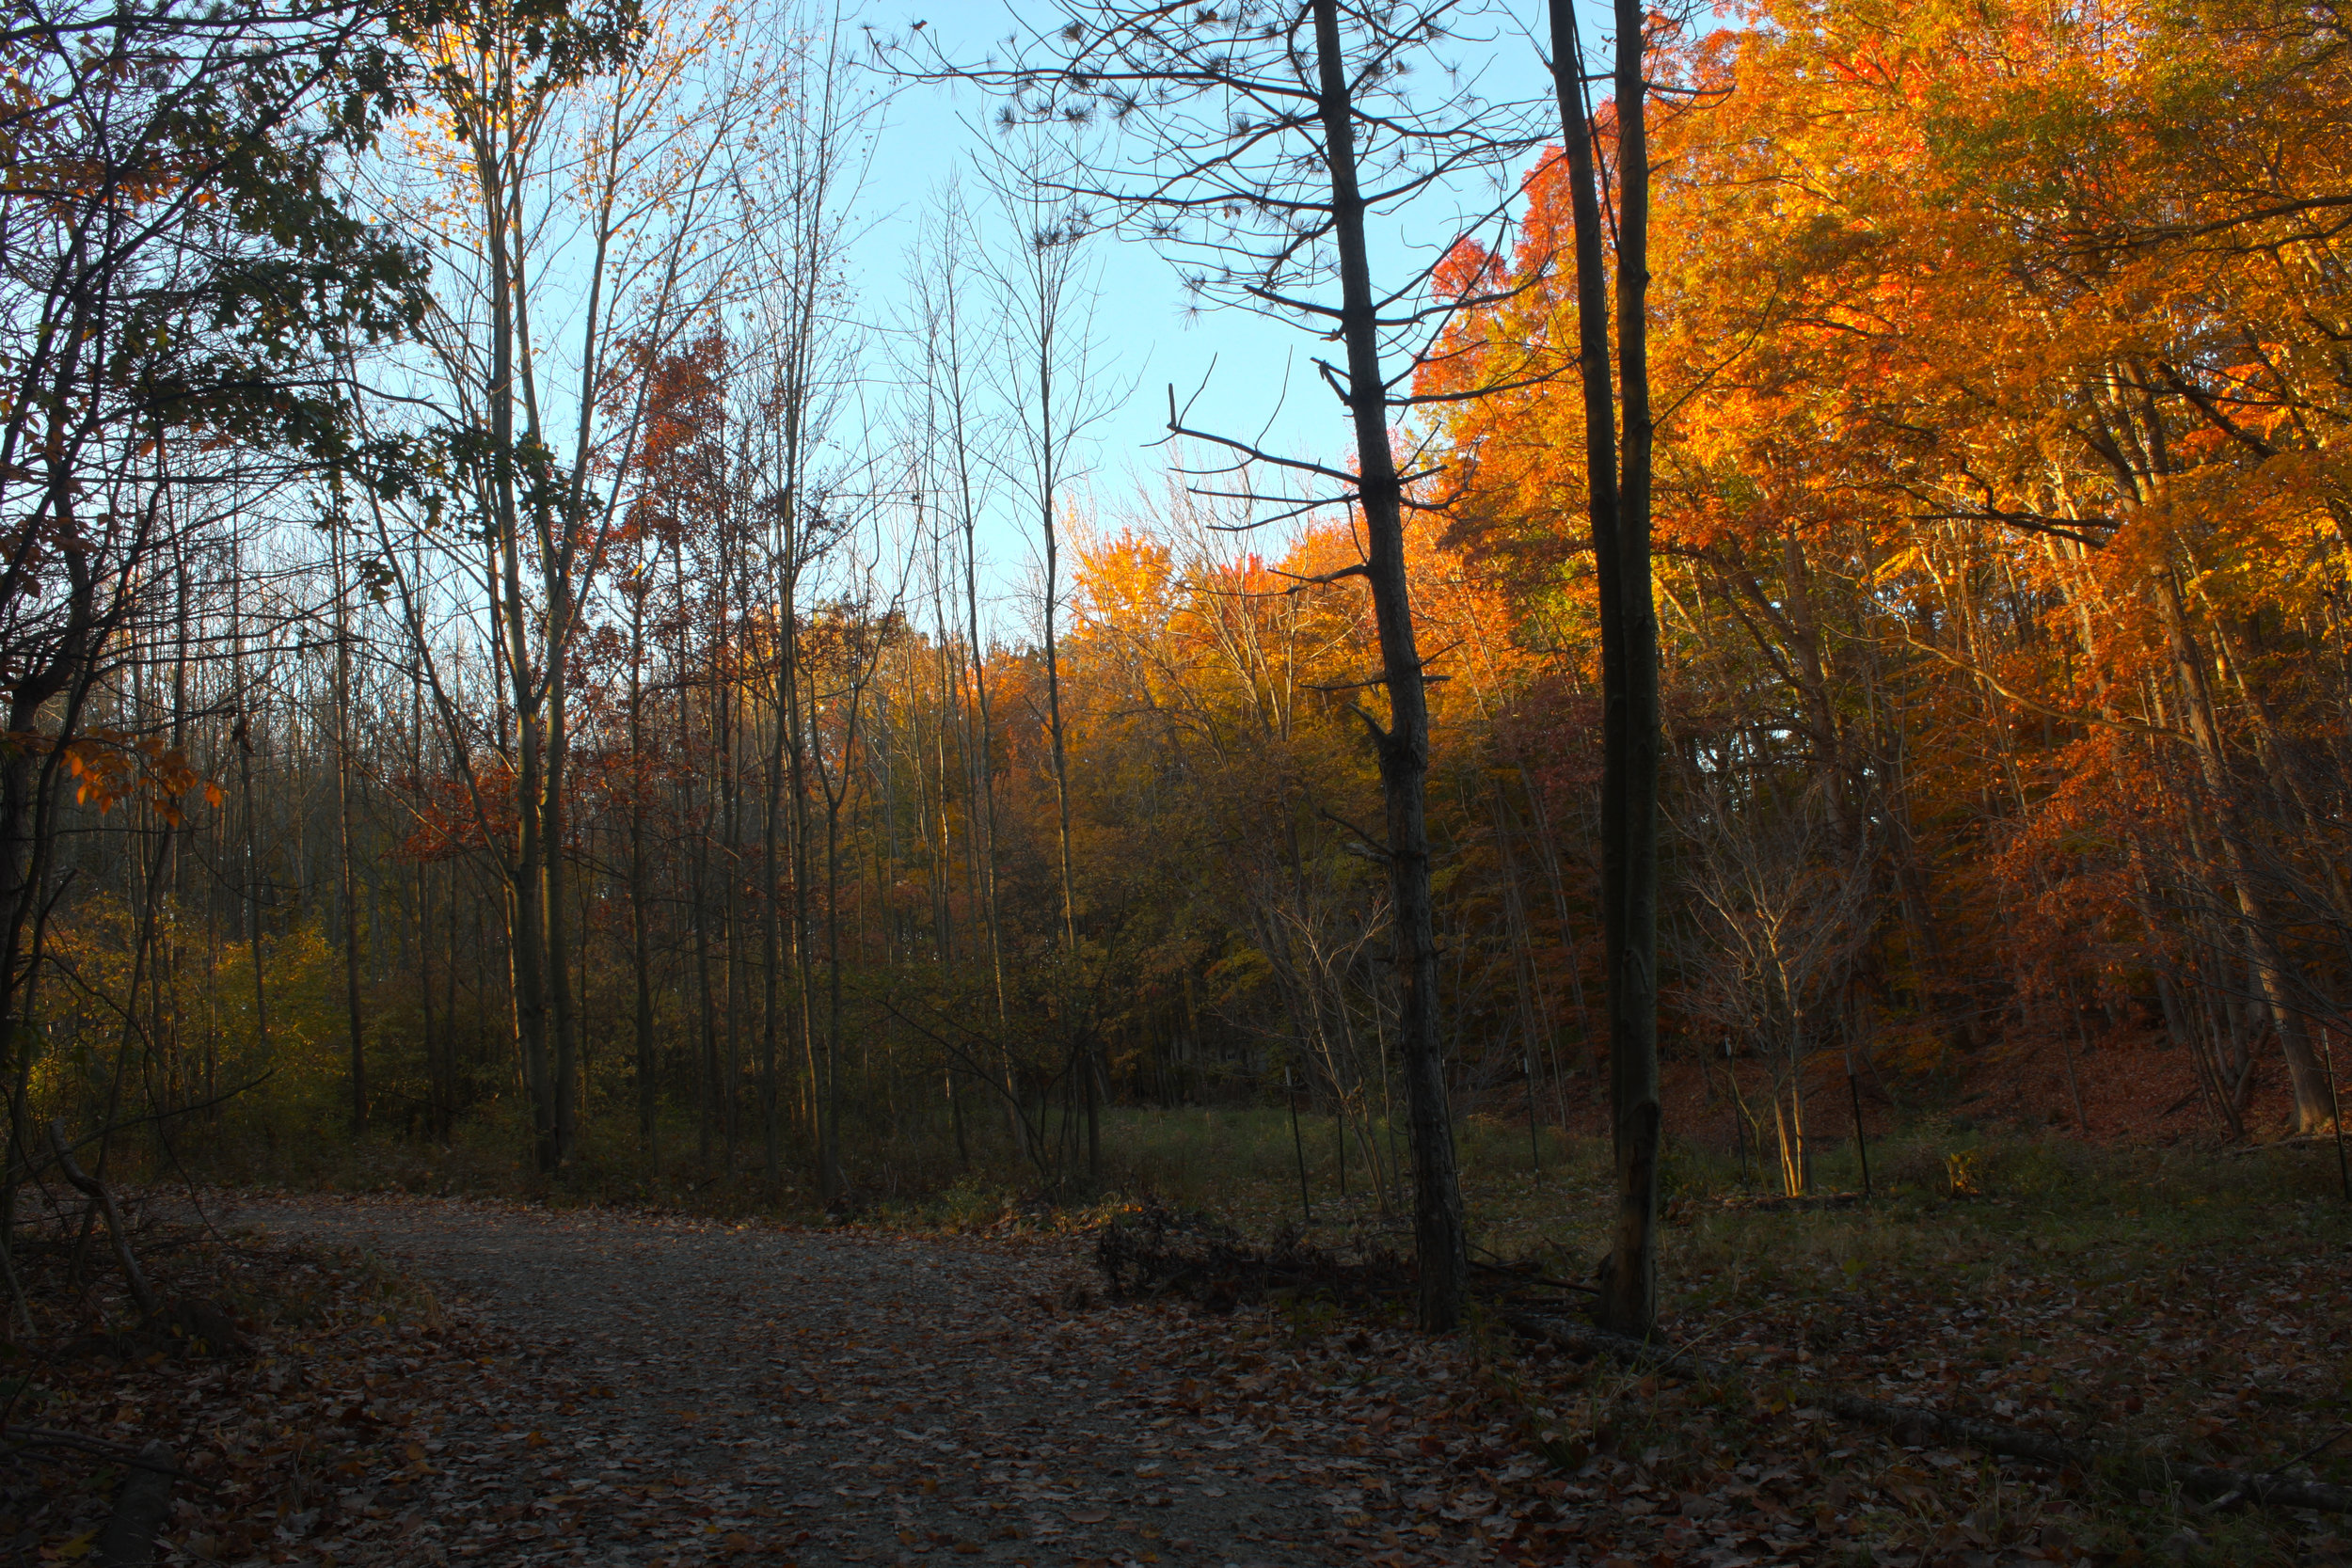 Autumn colors along the Sycamore Trail